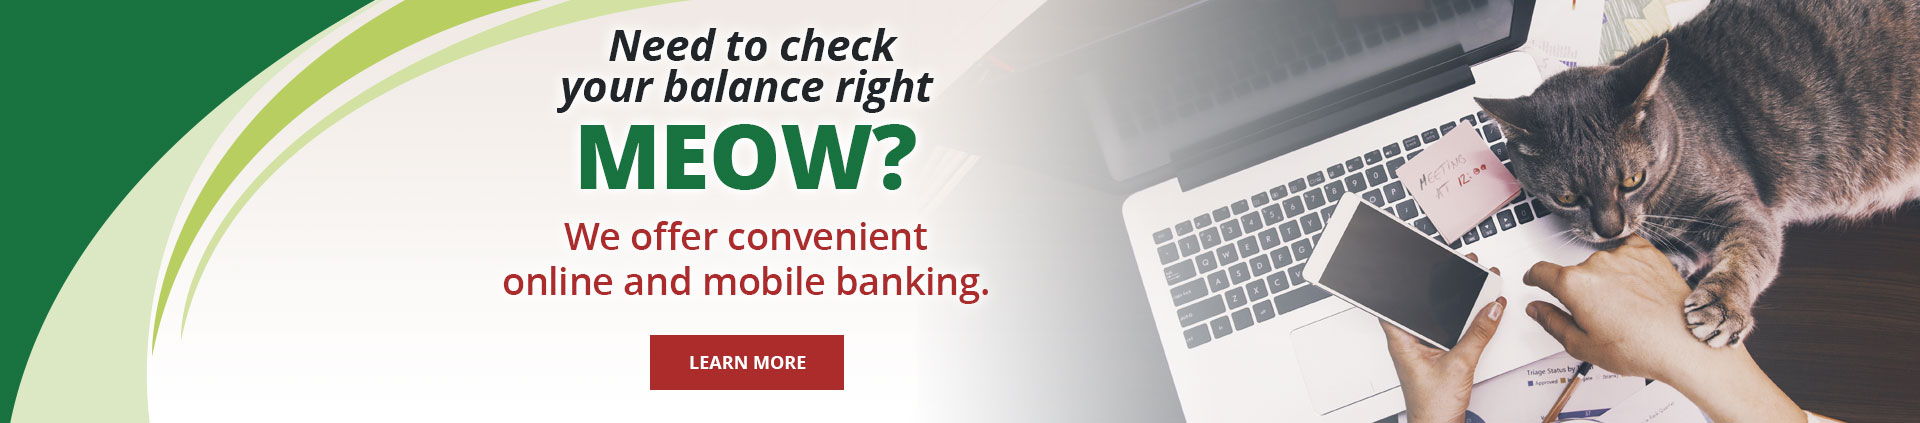 Need to check your balance right MEOW? We offer convenient online and mobile banking. Learn More
